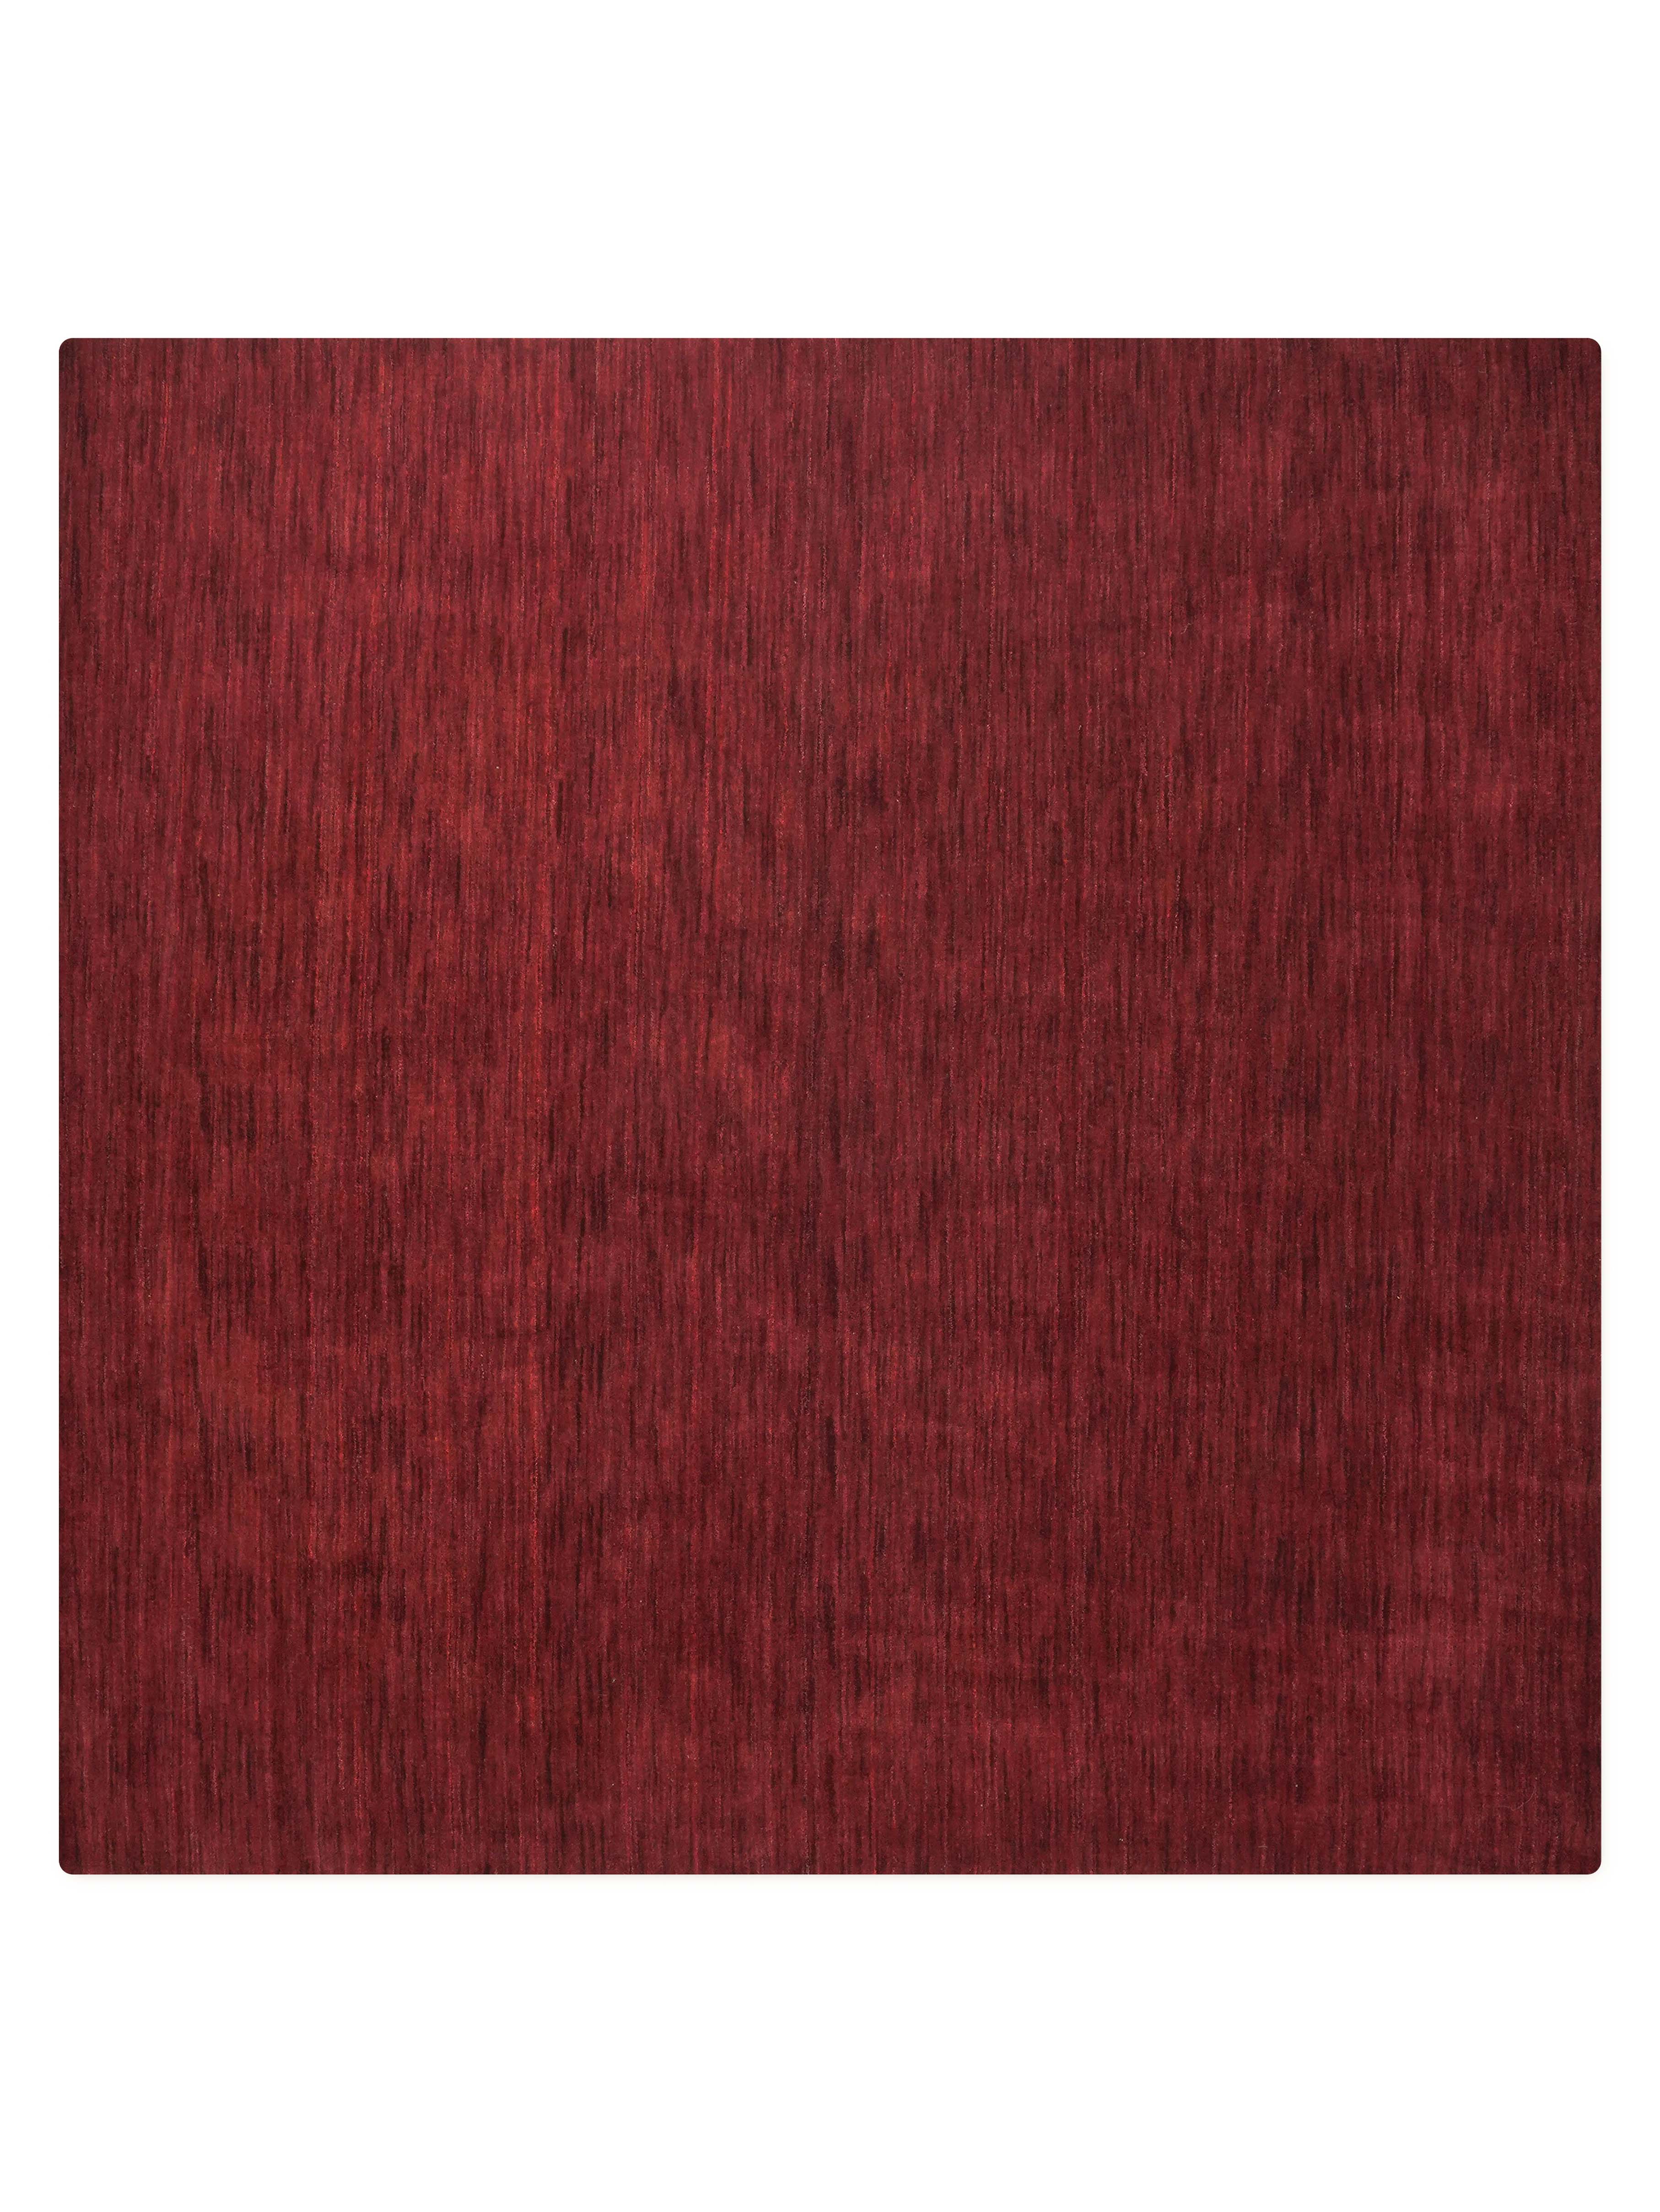 Hand Knotted Loom Wool Square Area Rug Solid Dark Red L00111